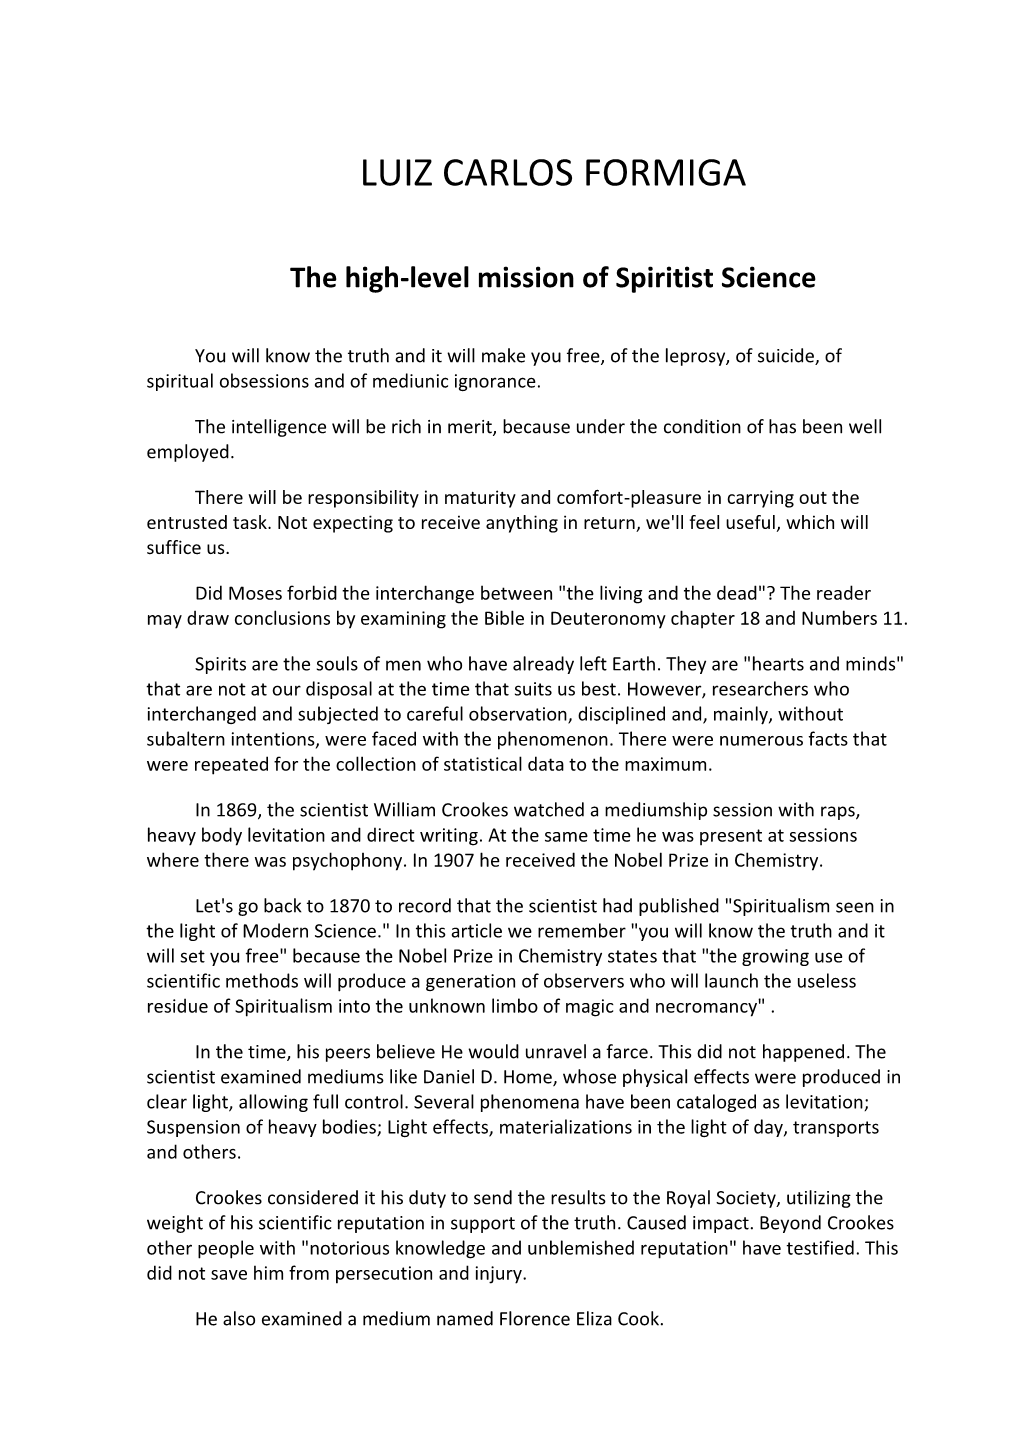 The High-Level Mission of Spiritist Science